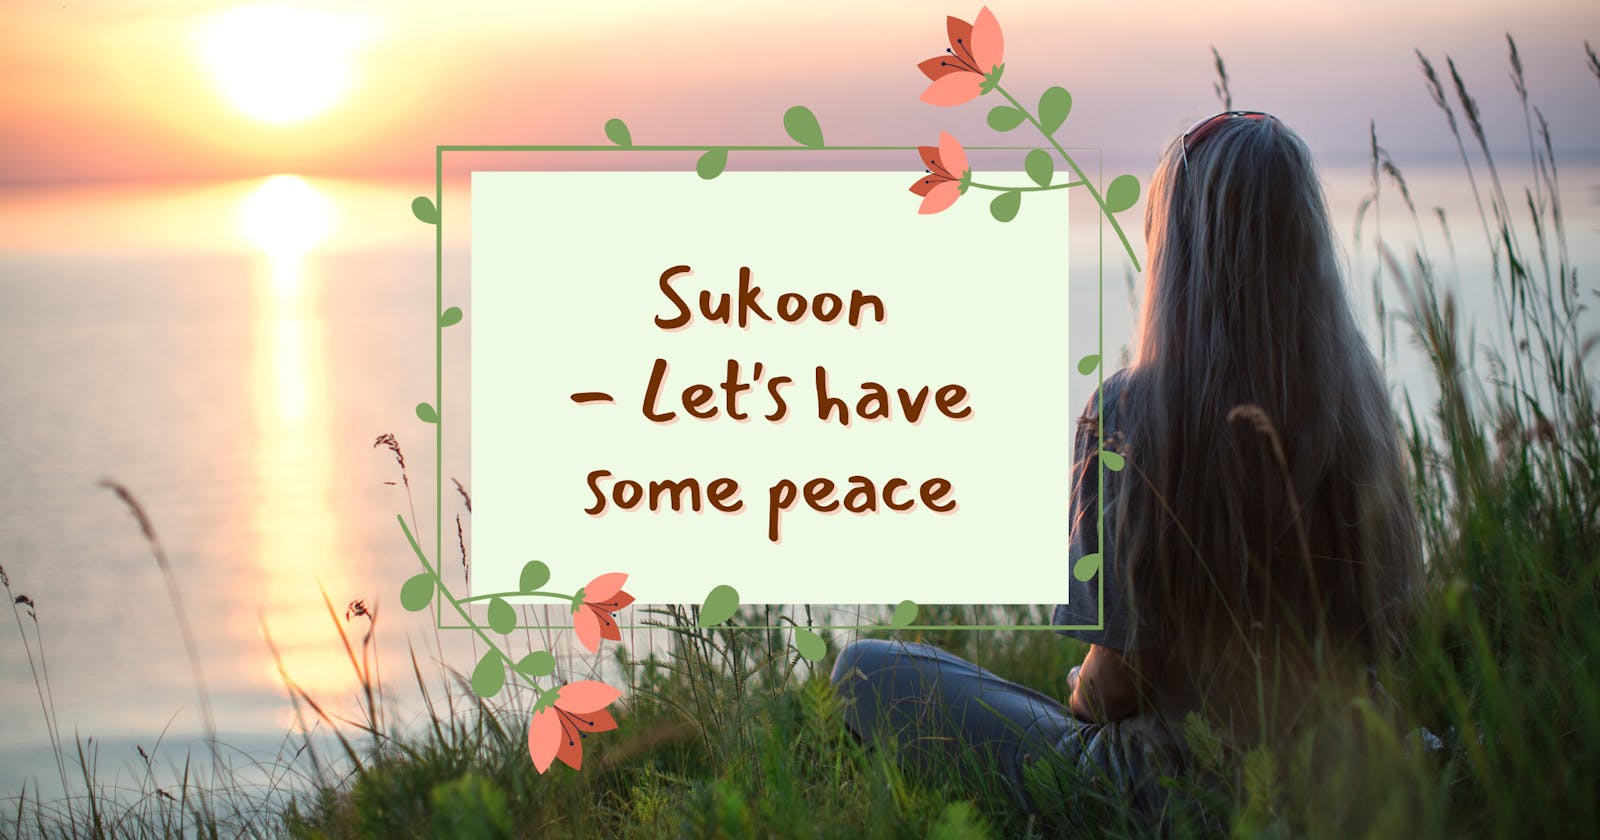 Sukoon - A Website to get relief from stress